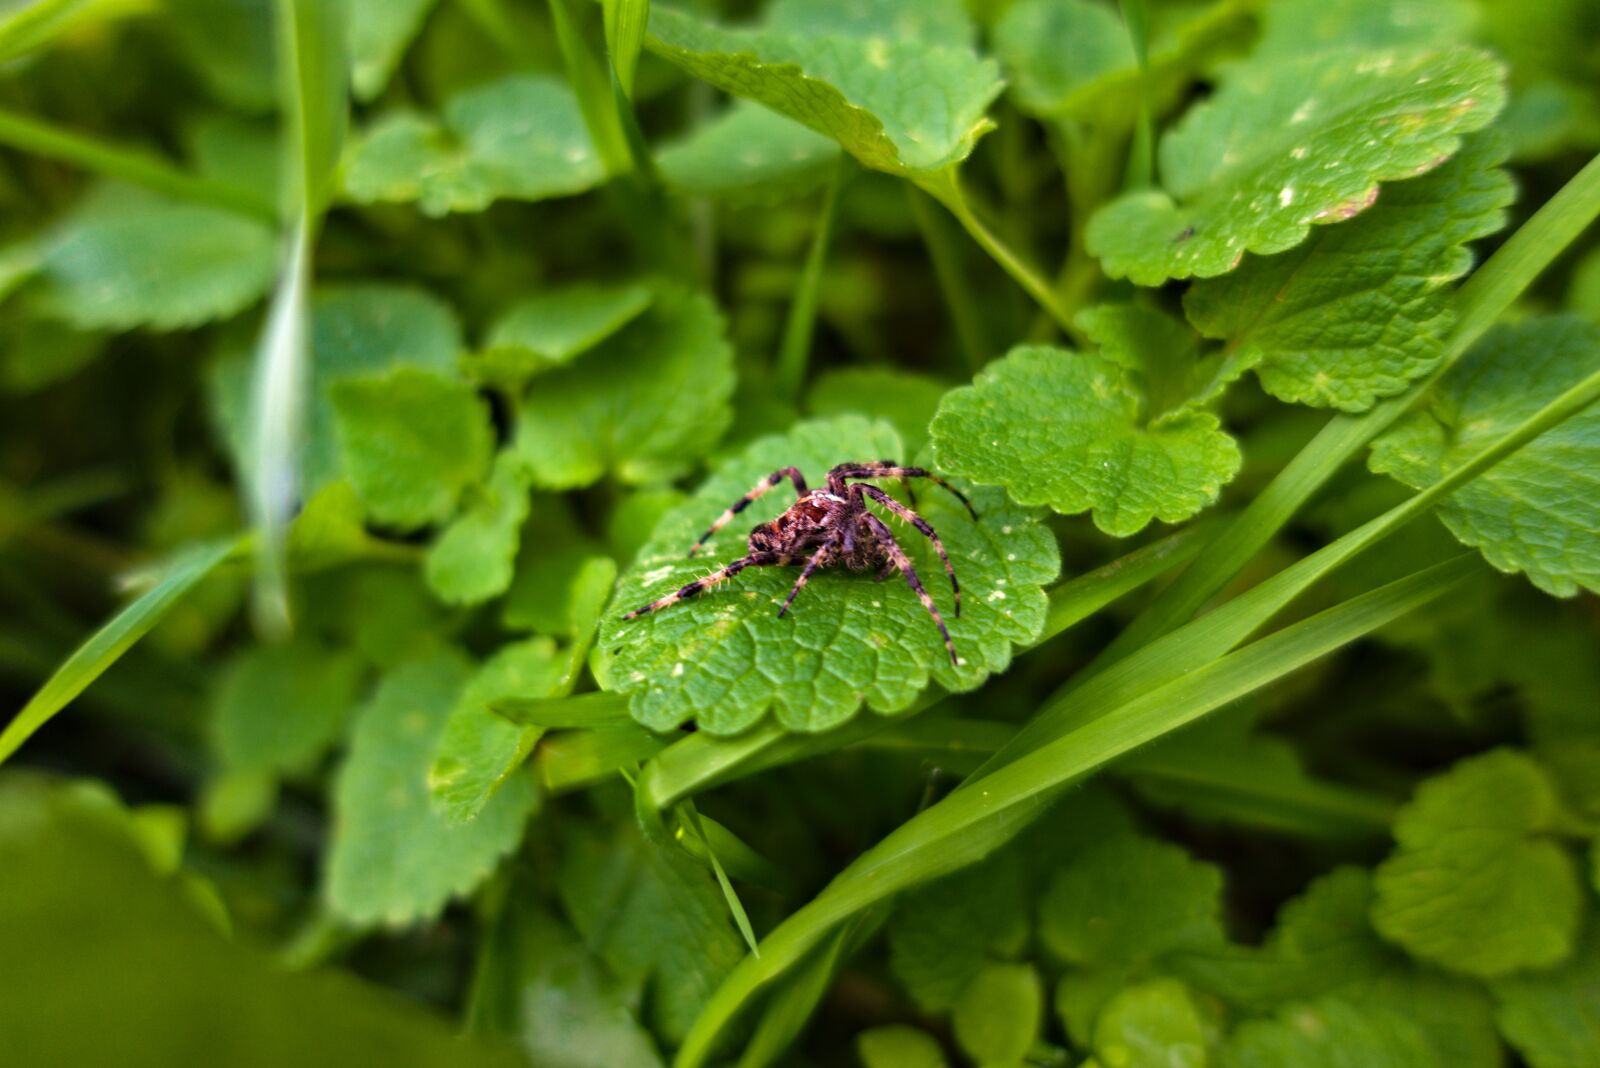 Sony DSC-RX100M5A sample photo. Spider, leaves, nature photography